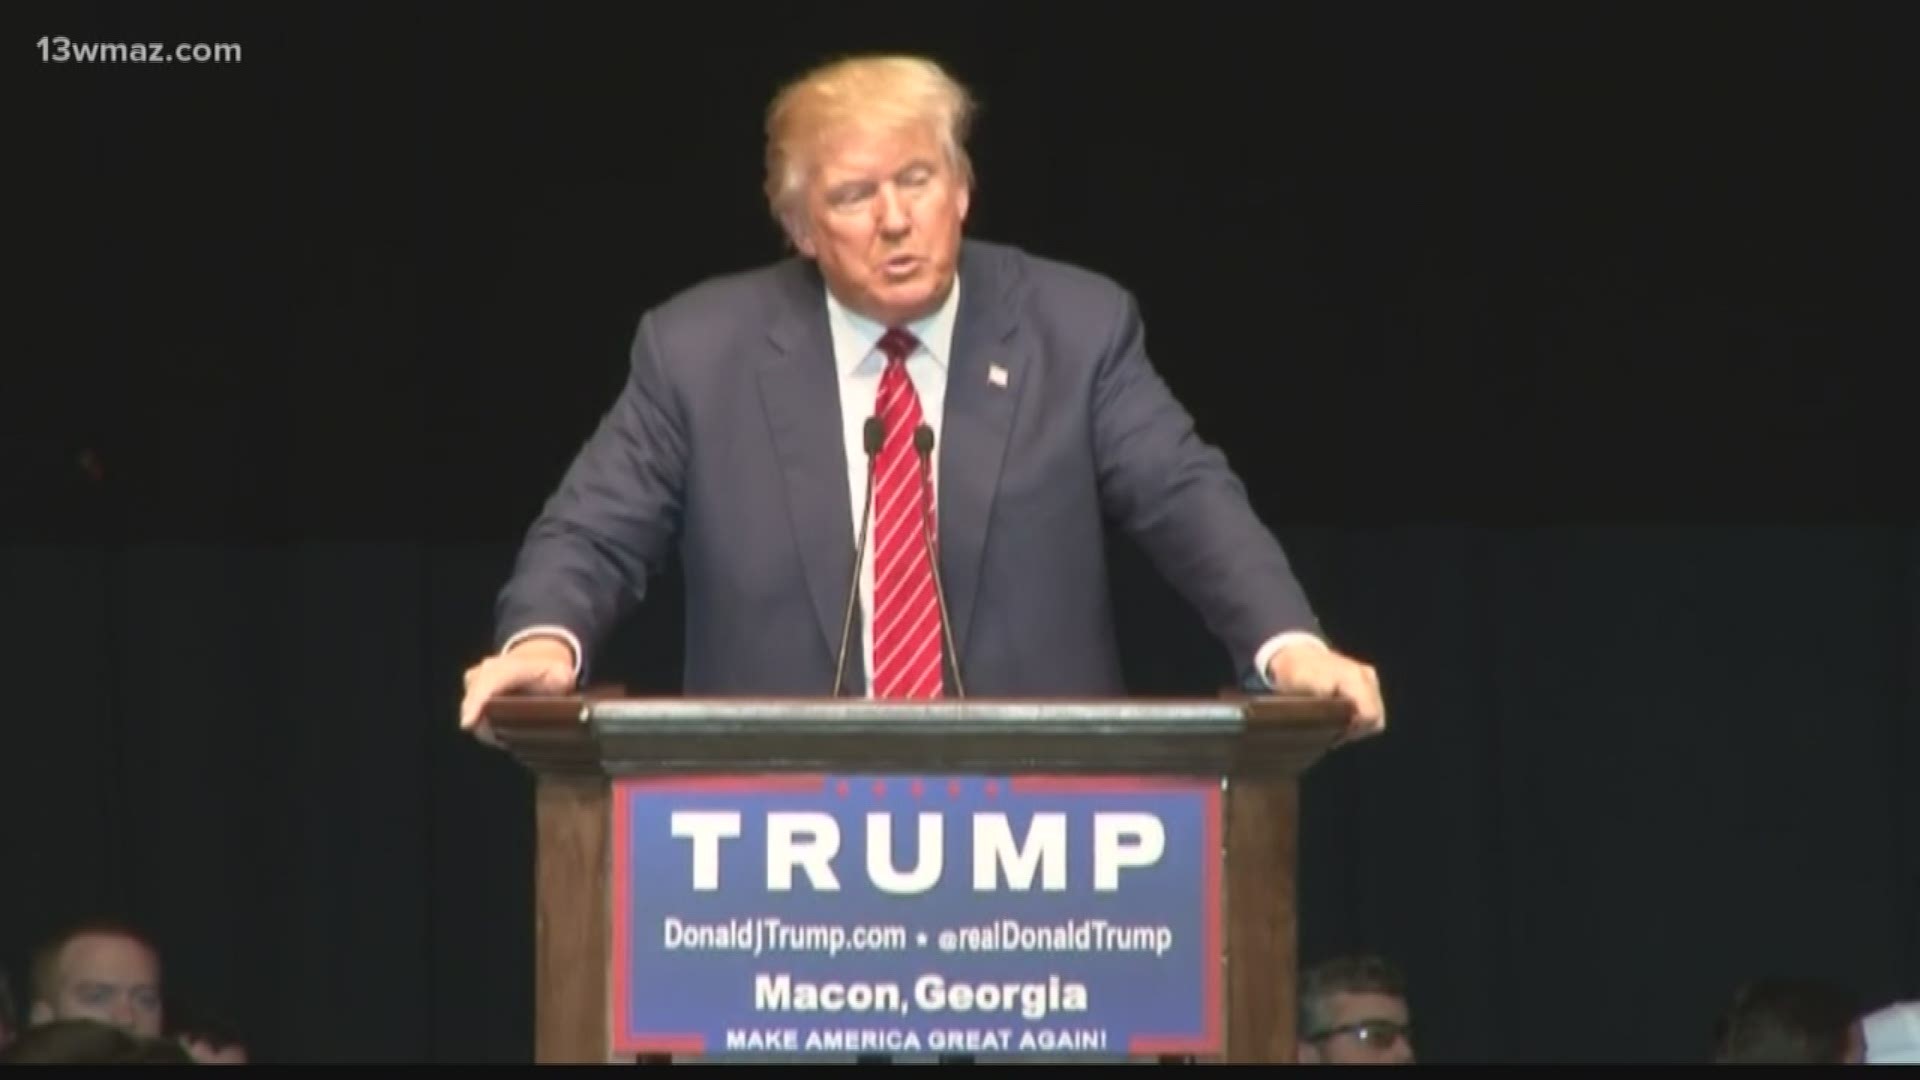 President Trump coming to Macon this weekend